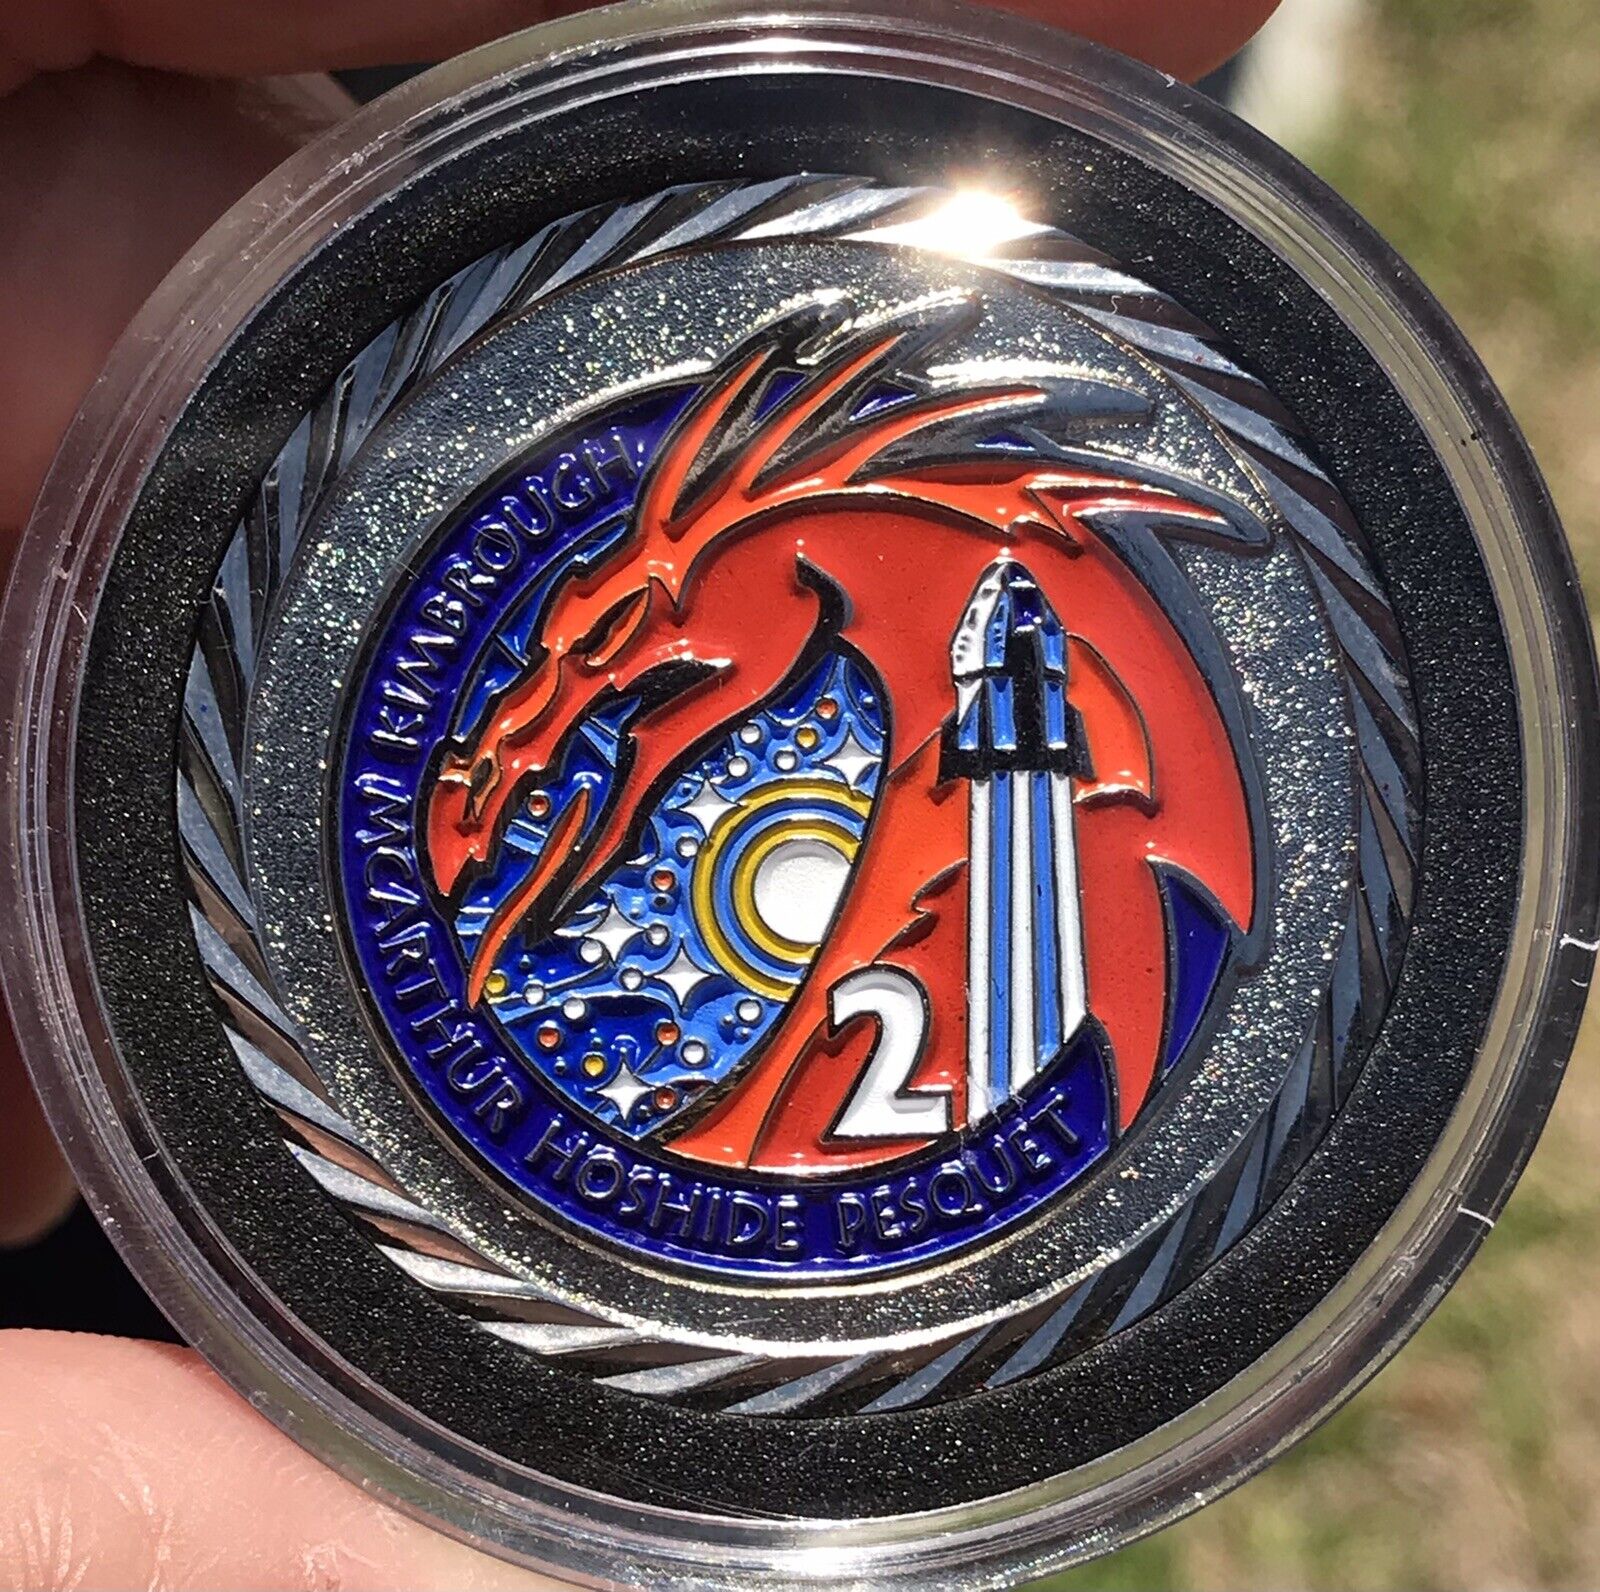 Spacex coin